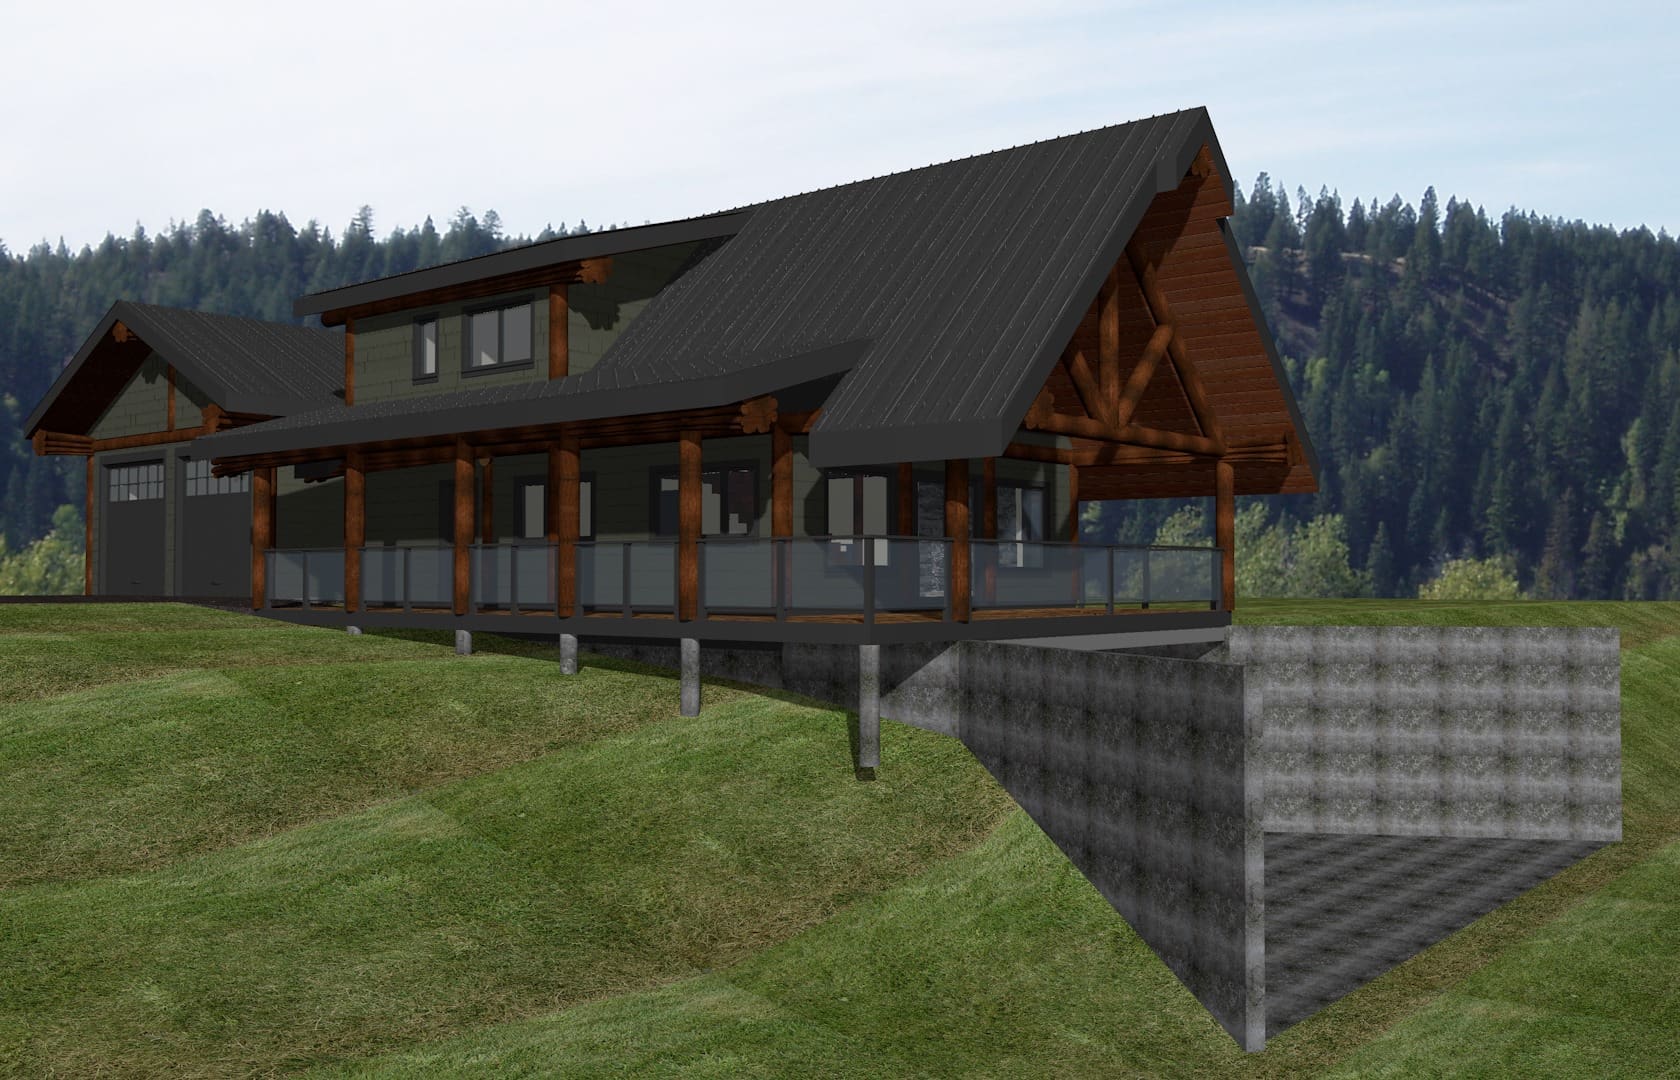 B.C Home builders custom cabin kit with covered deck.